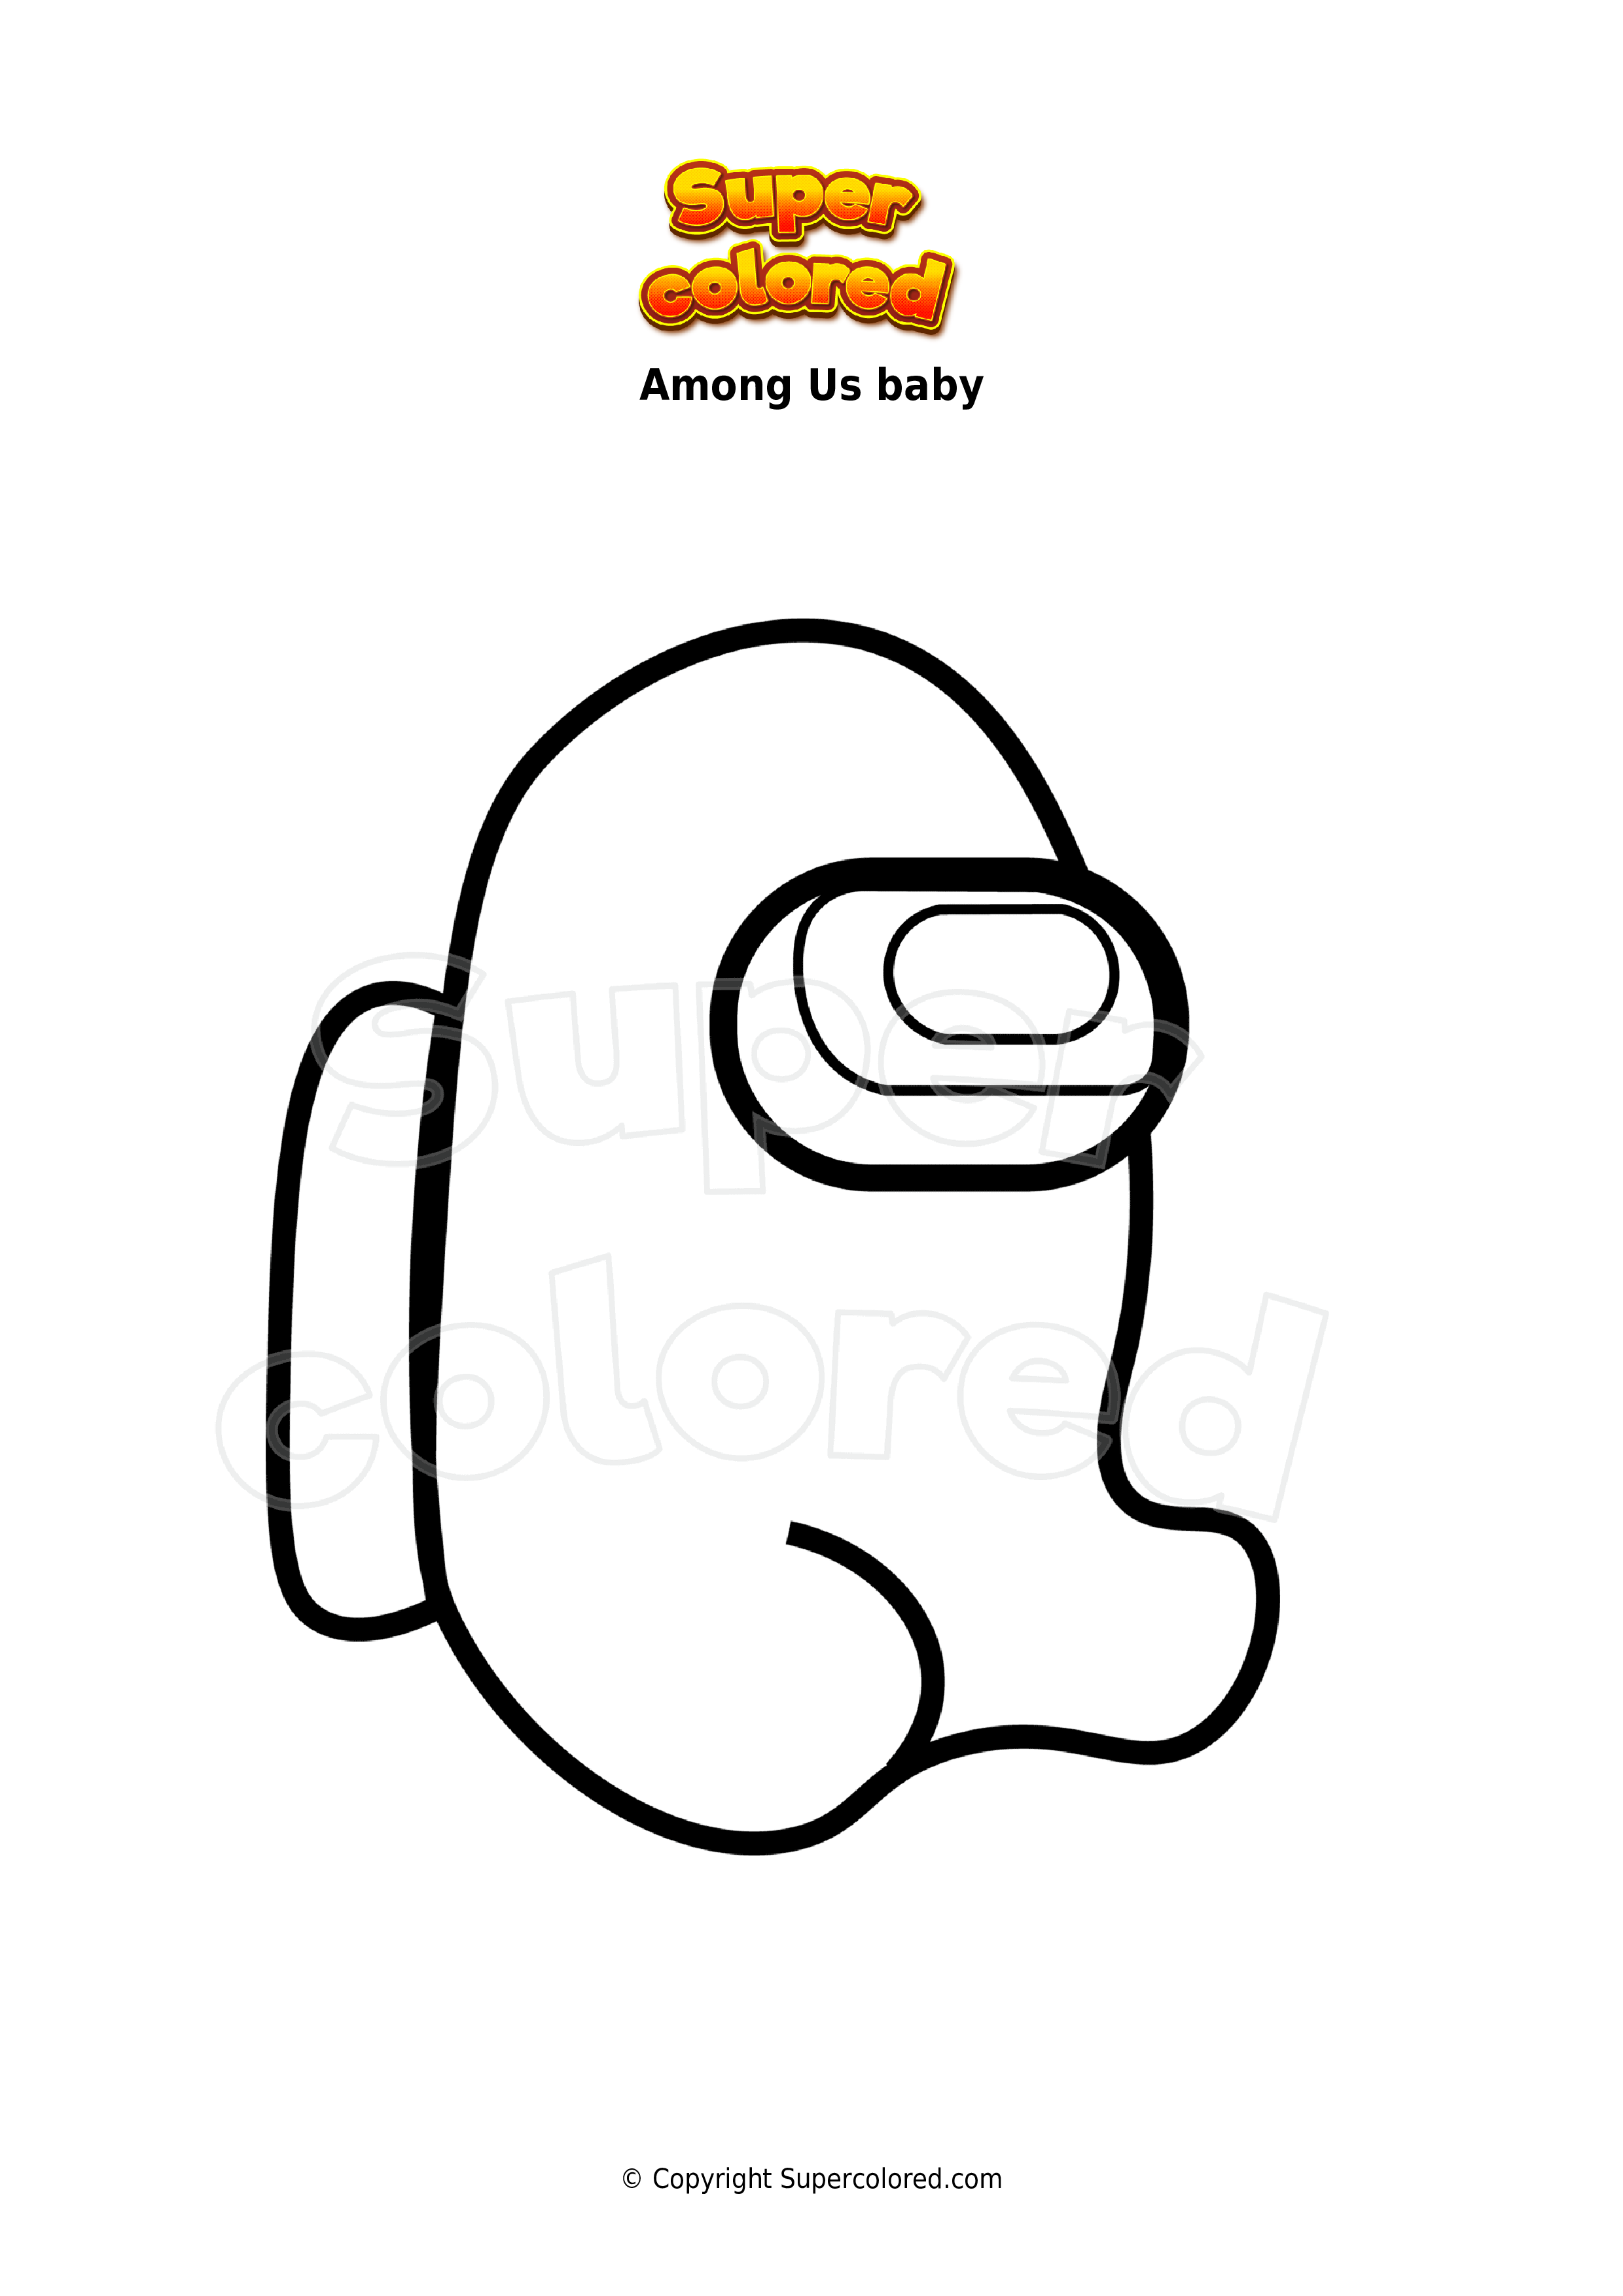 Coloring page Among Us baby - Supercolored.com